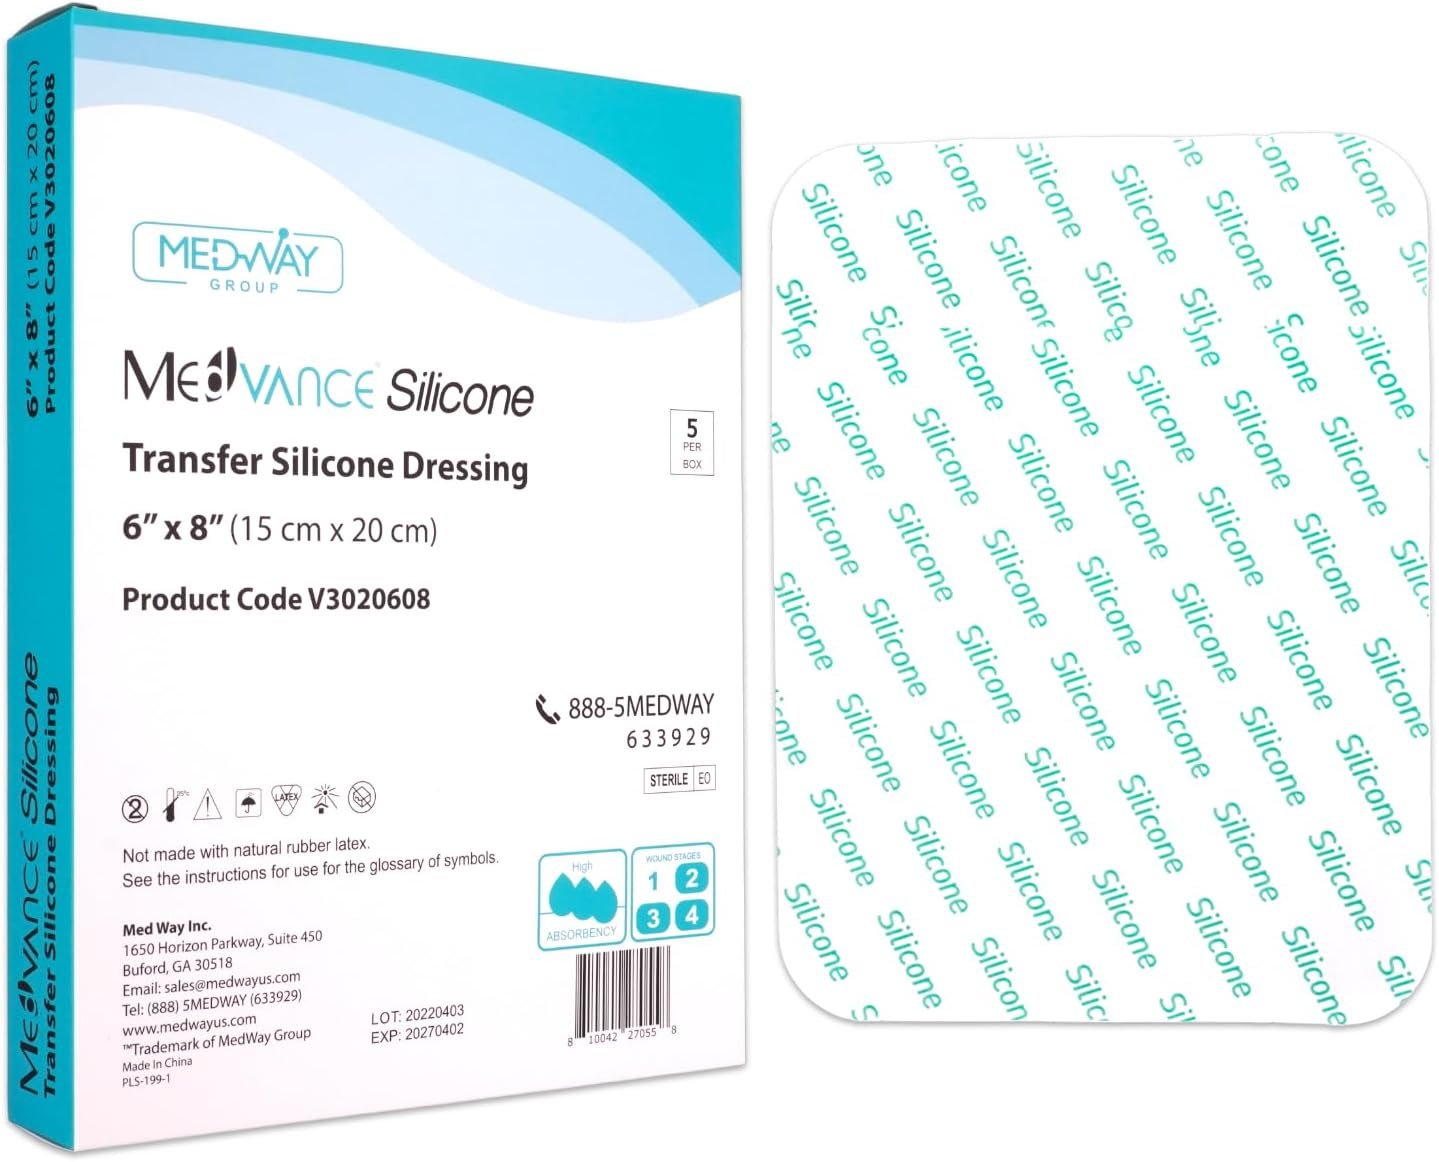 MedVance Silicone Adhesive Transfer Dressing, 6"x8", Single Piece